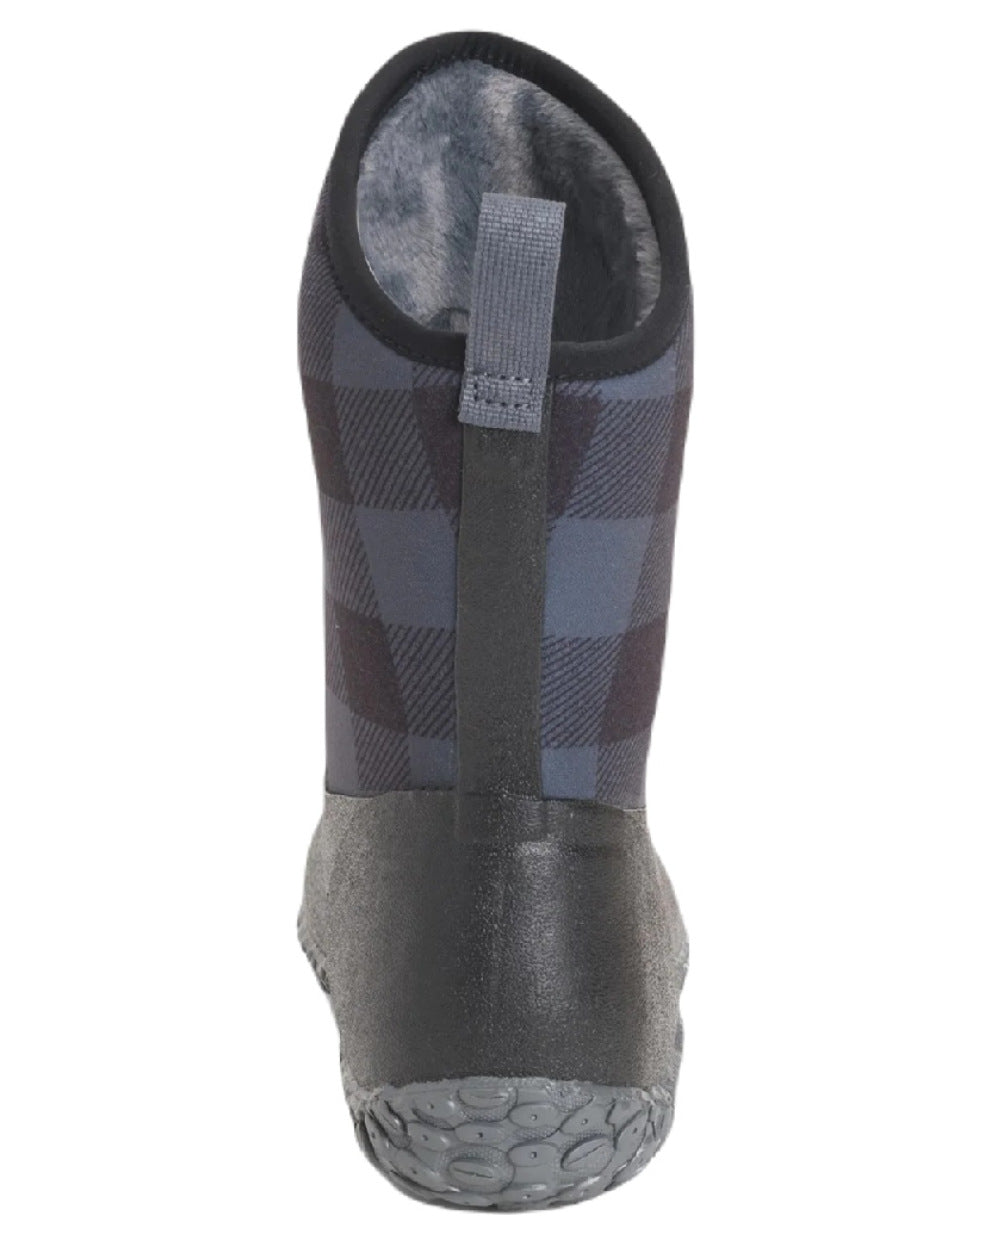 Black/Grey Plaid Coloured Muck Boots Womens Muckster II Mid Wellingtons On A White Background 